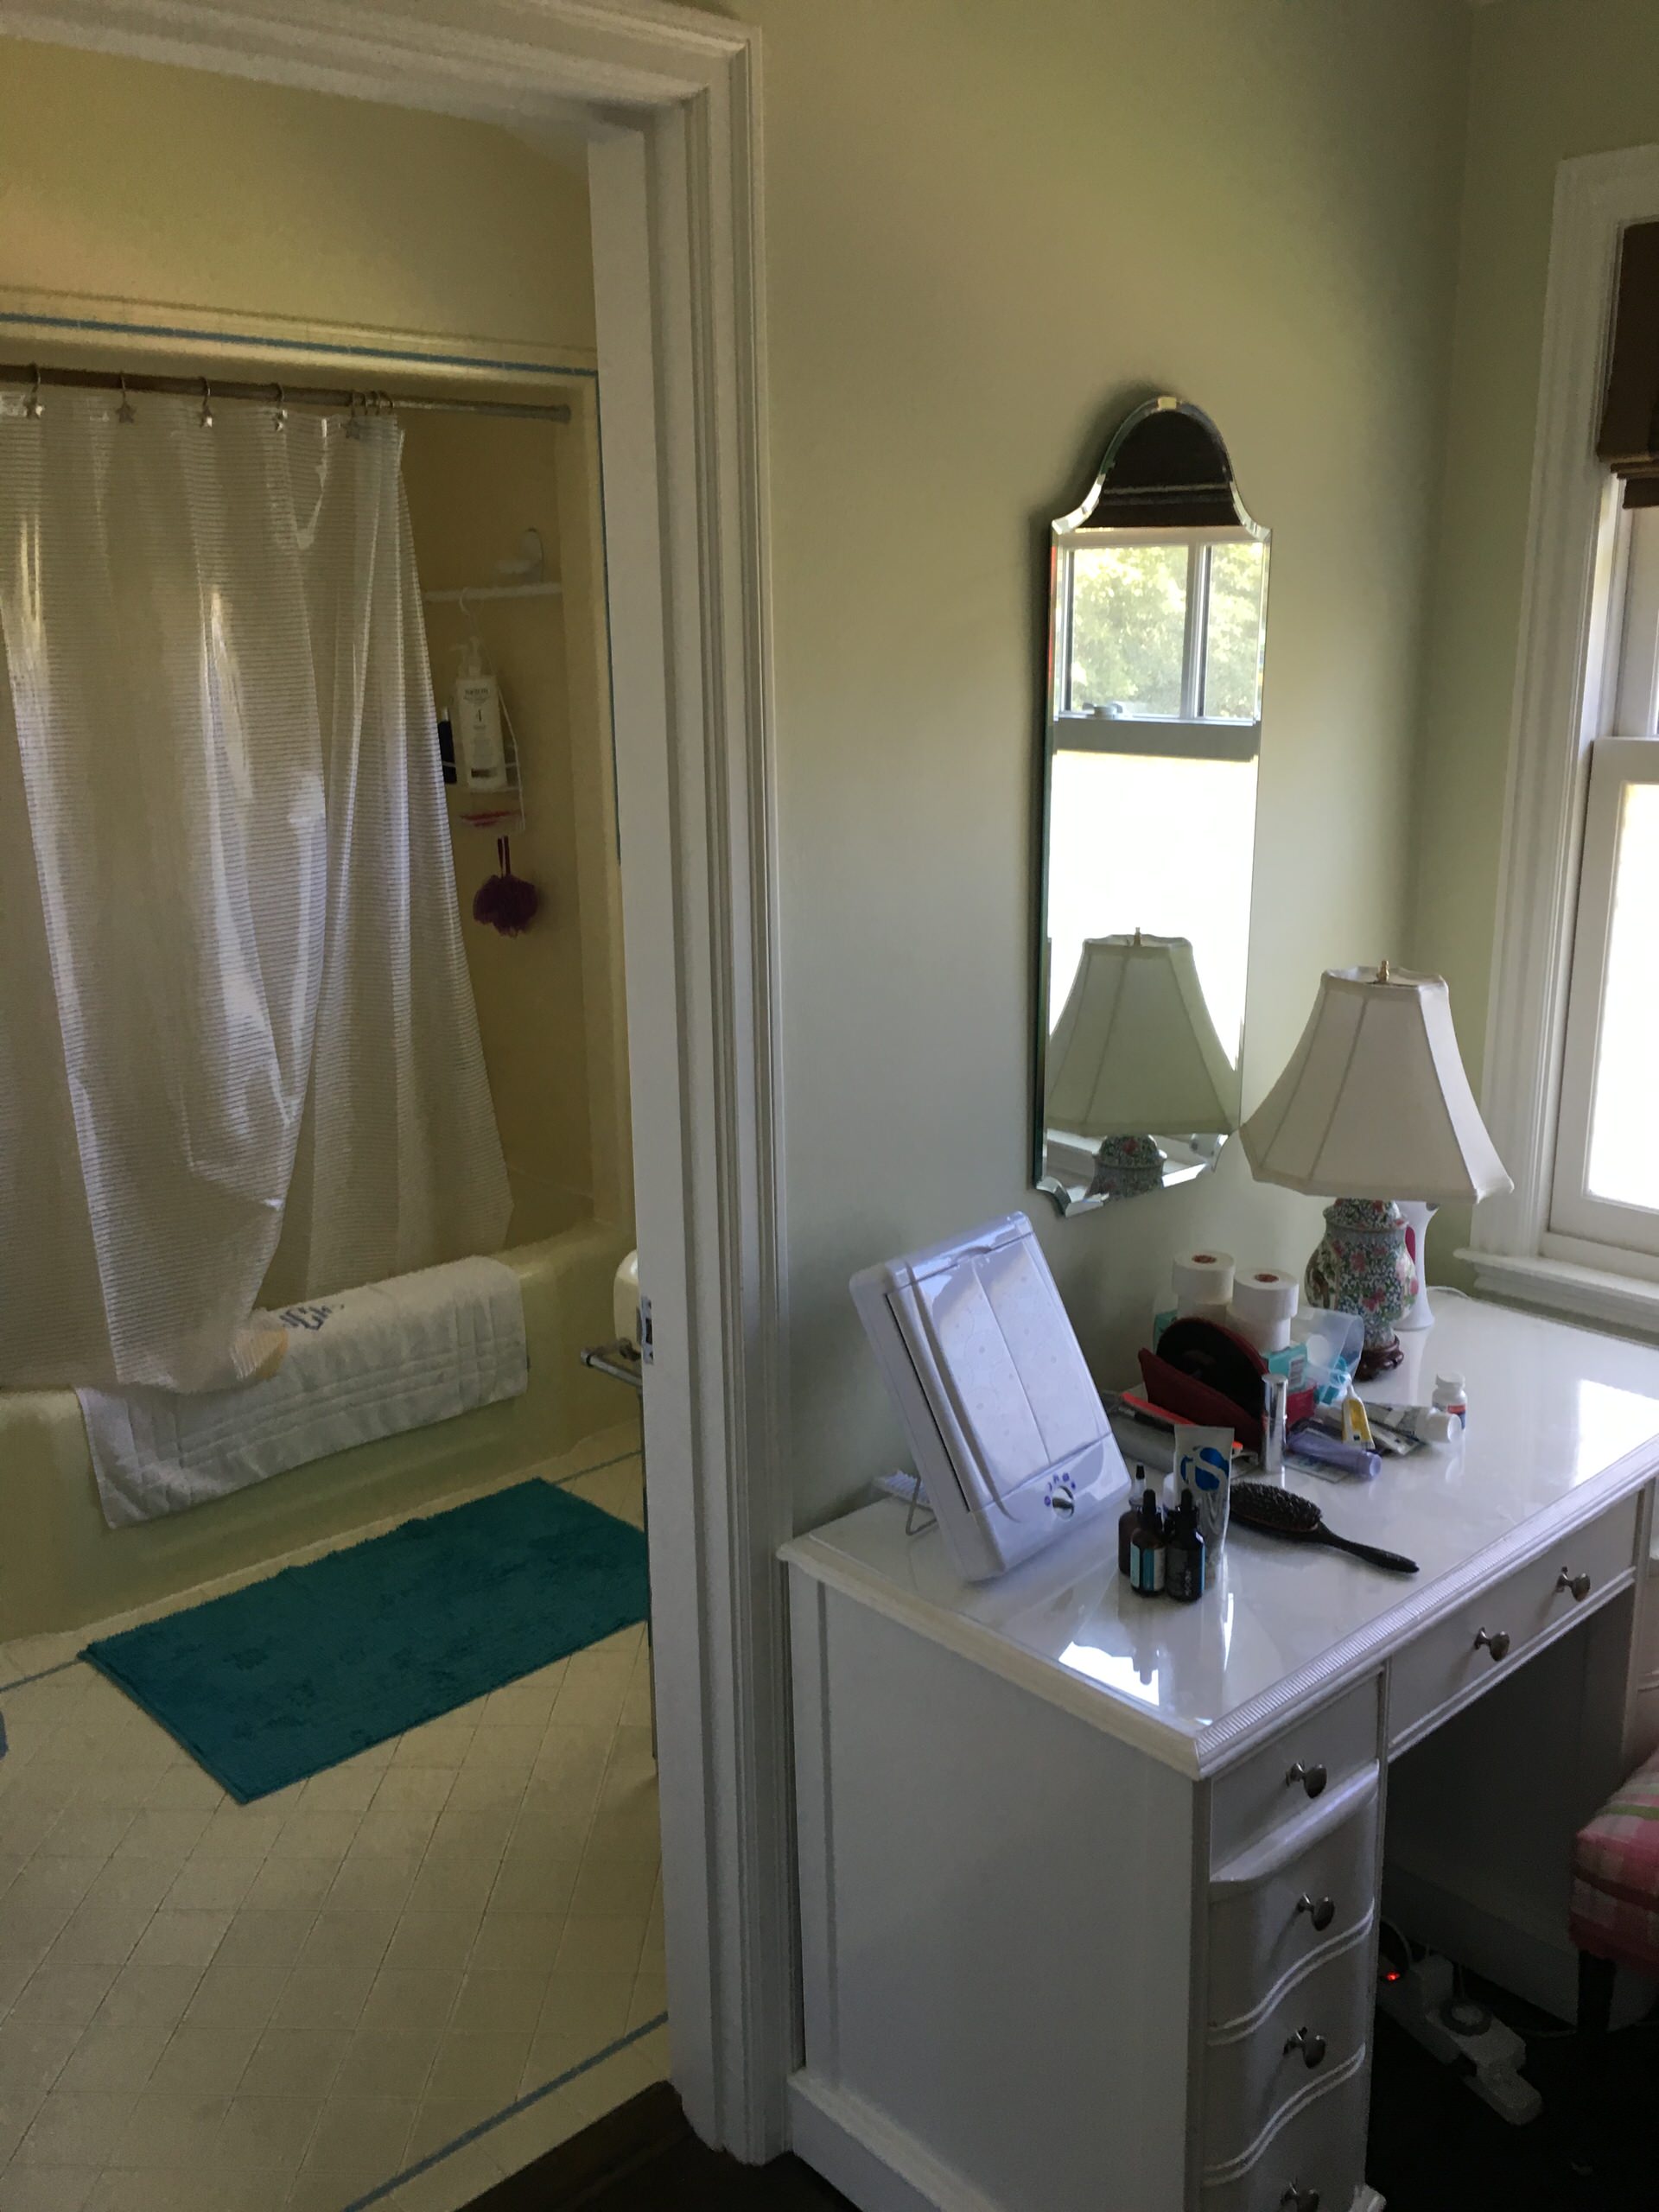 Colonial Revival - Before, master bath